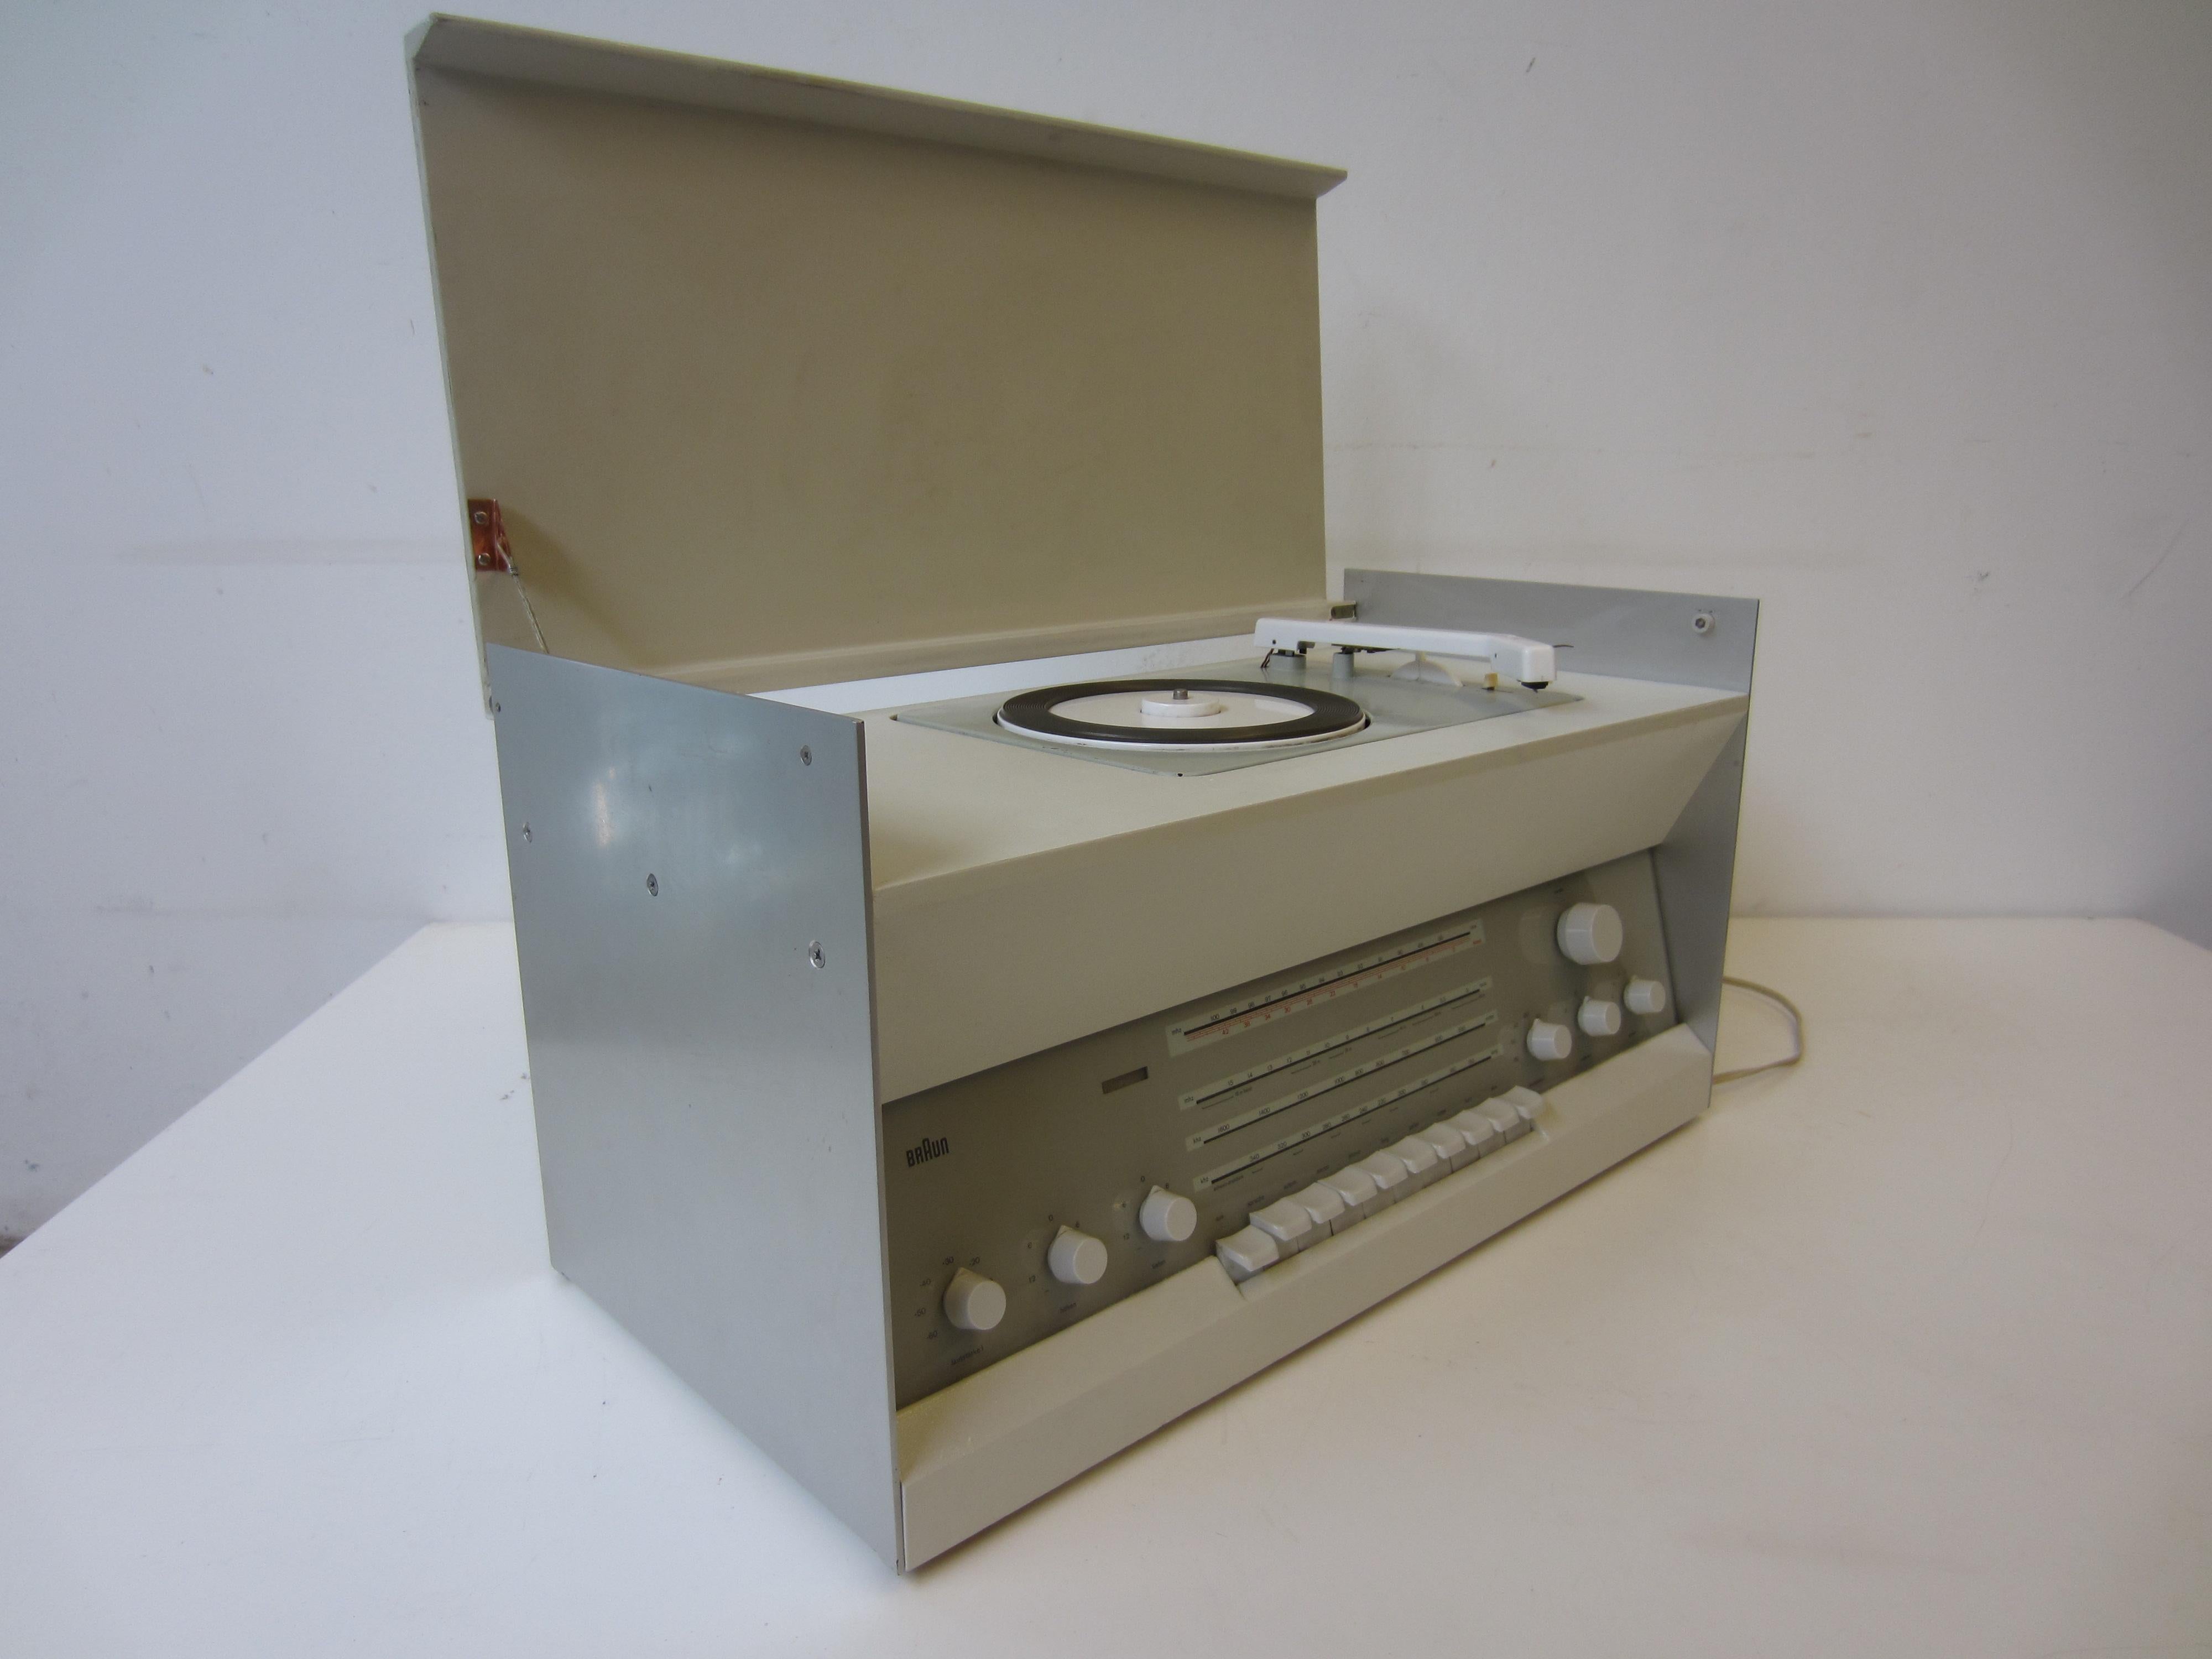 Mid-Century Modern Atelier 3 Turntable and Radio by Dieter Rams for Braun, 1969